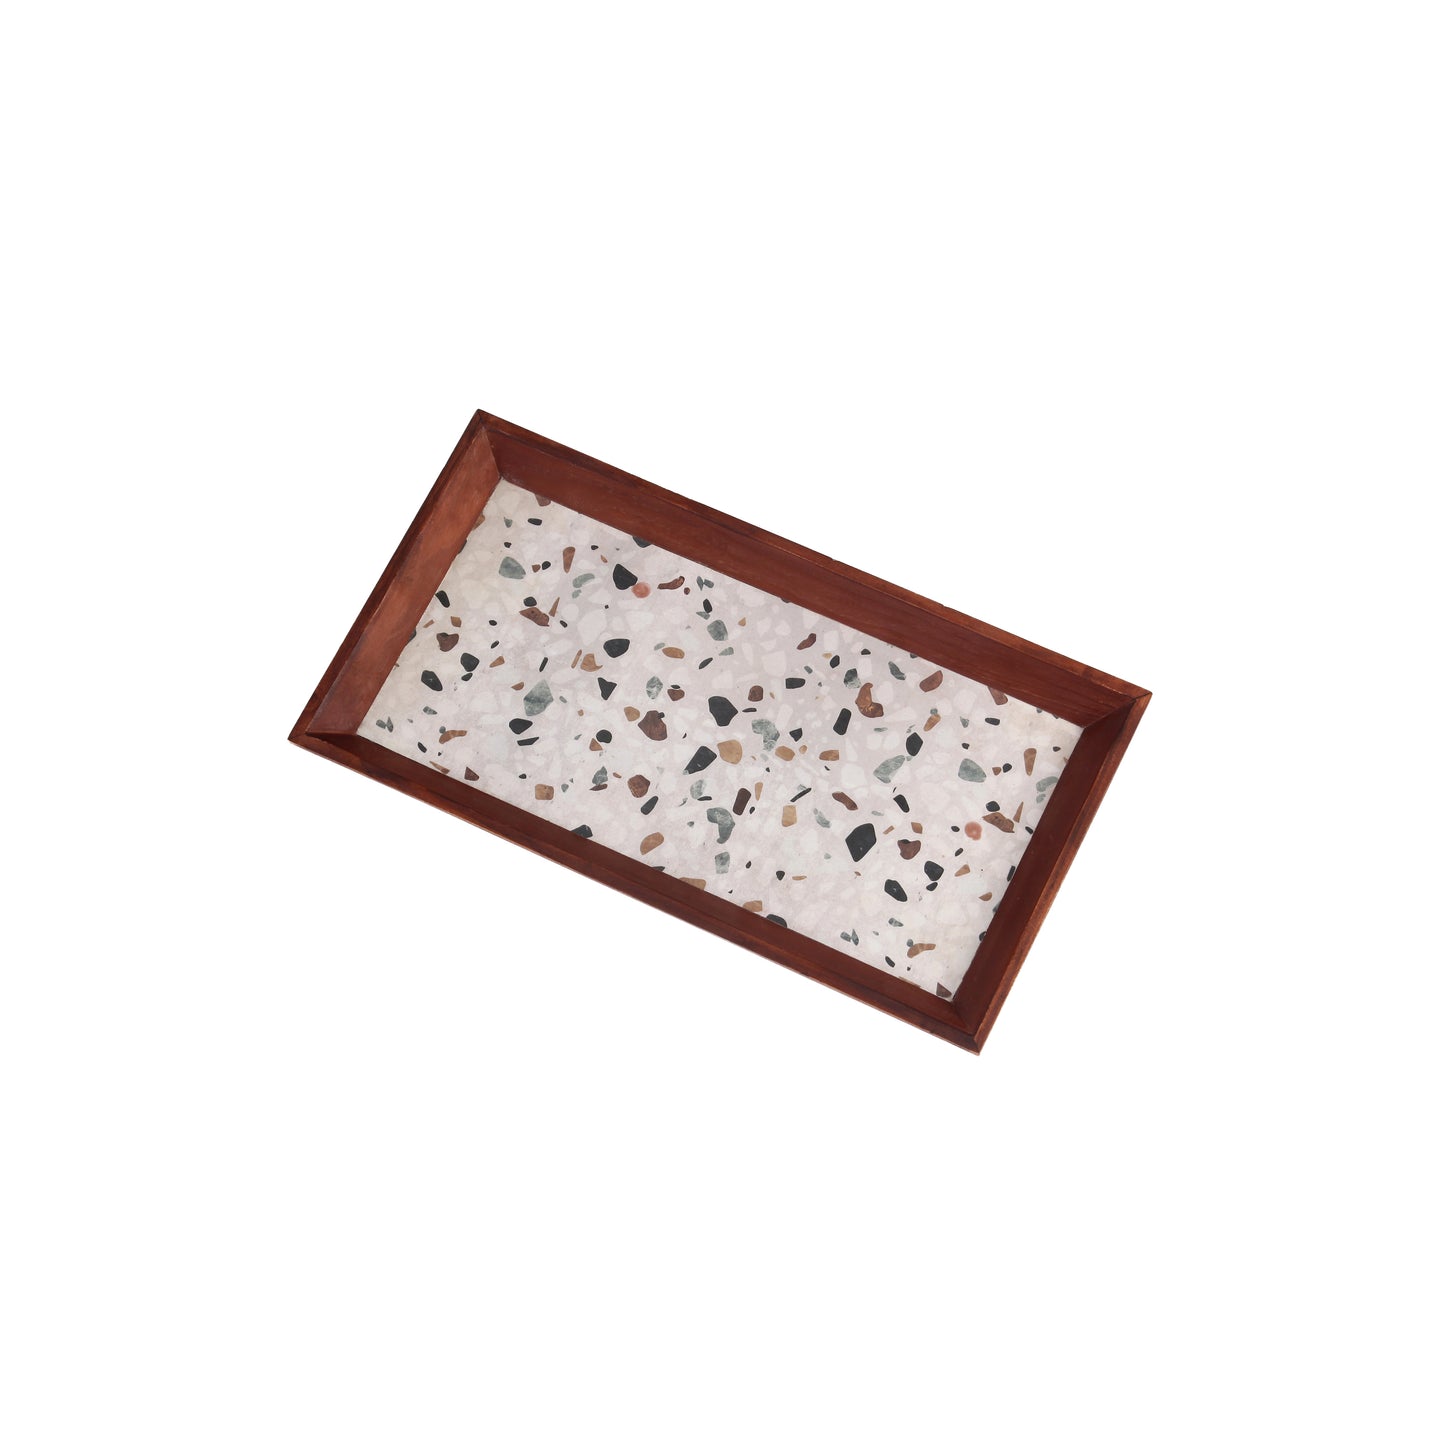 A Tiny Mistake Mosaic Rectangle Wooden Serving Tray, 35 x 20 x 2 cm